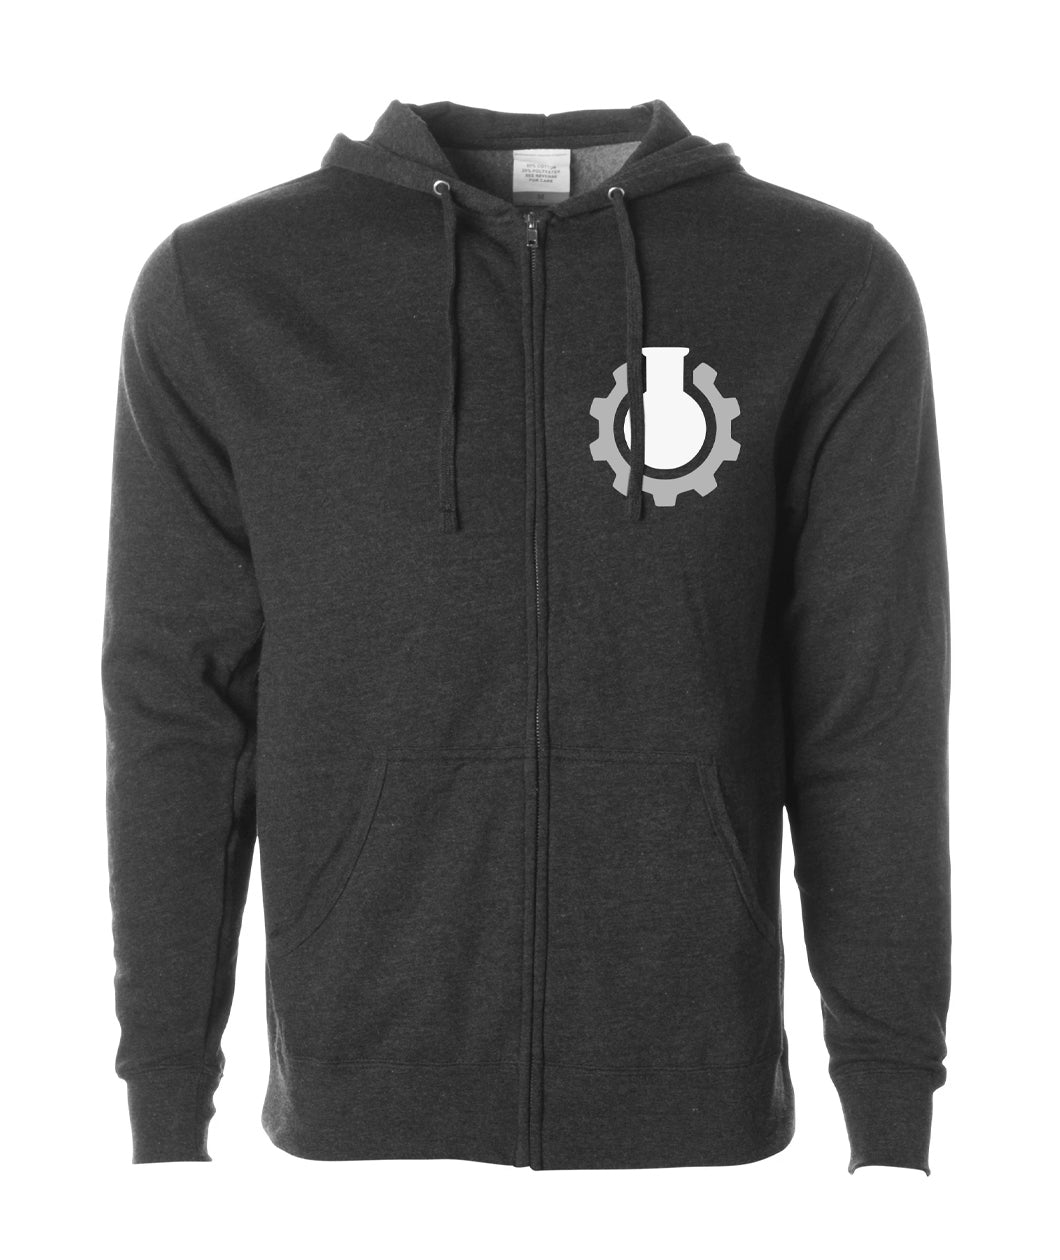 A grey zip up hoodie with a white beaker surrounded by a grey gear in the top left of the hoodie - from CGP Grey.